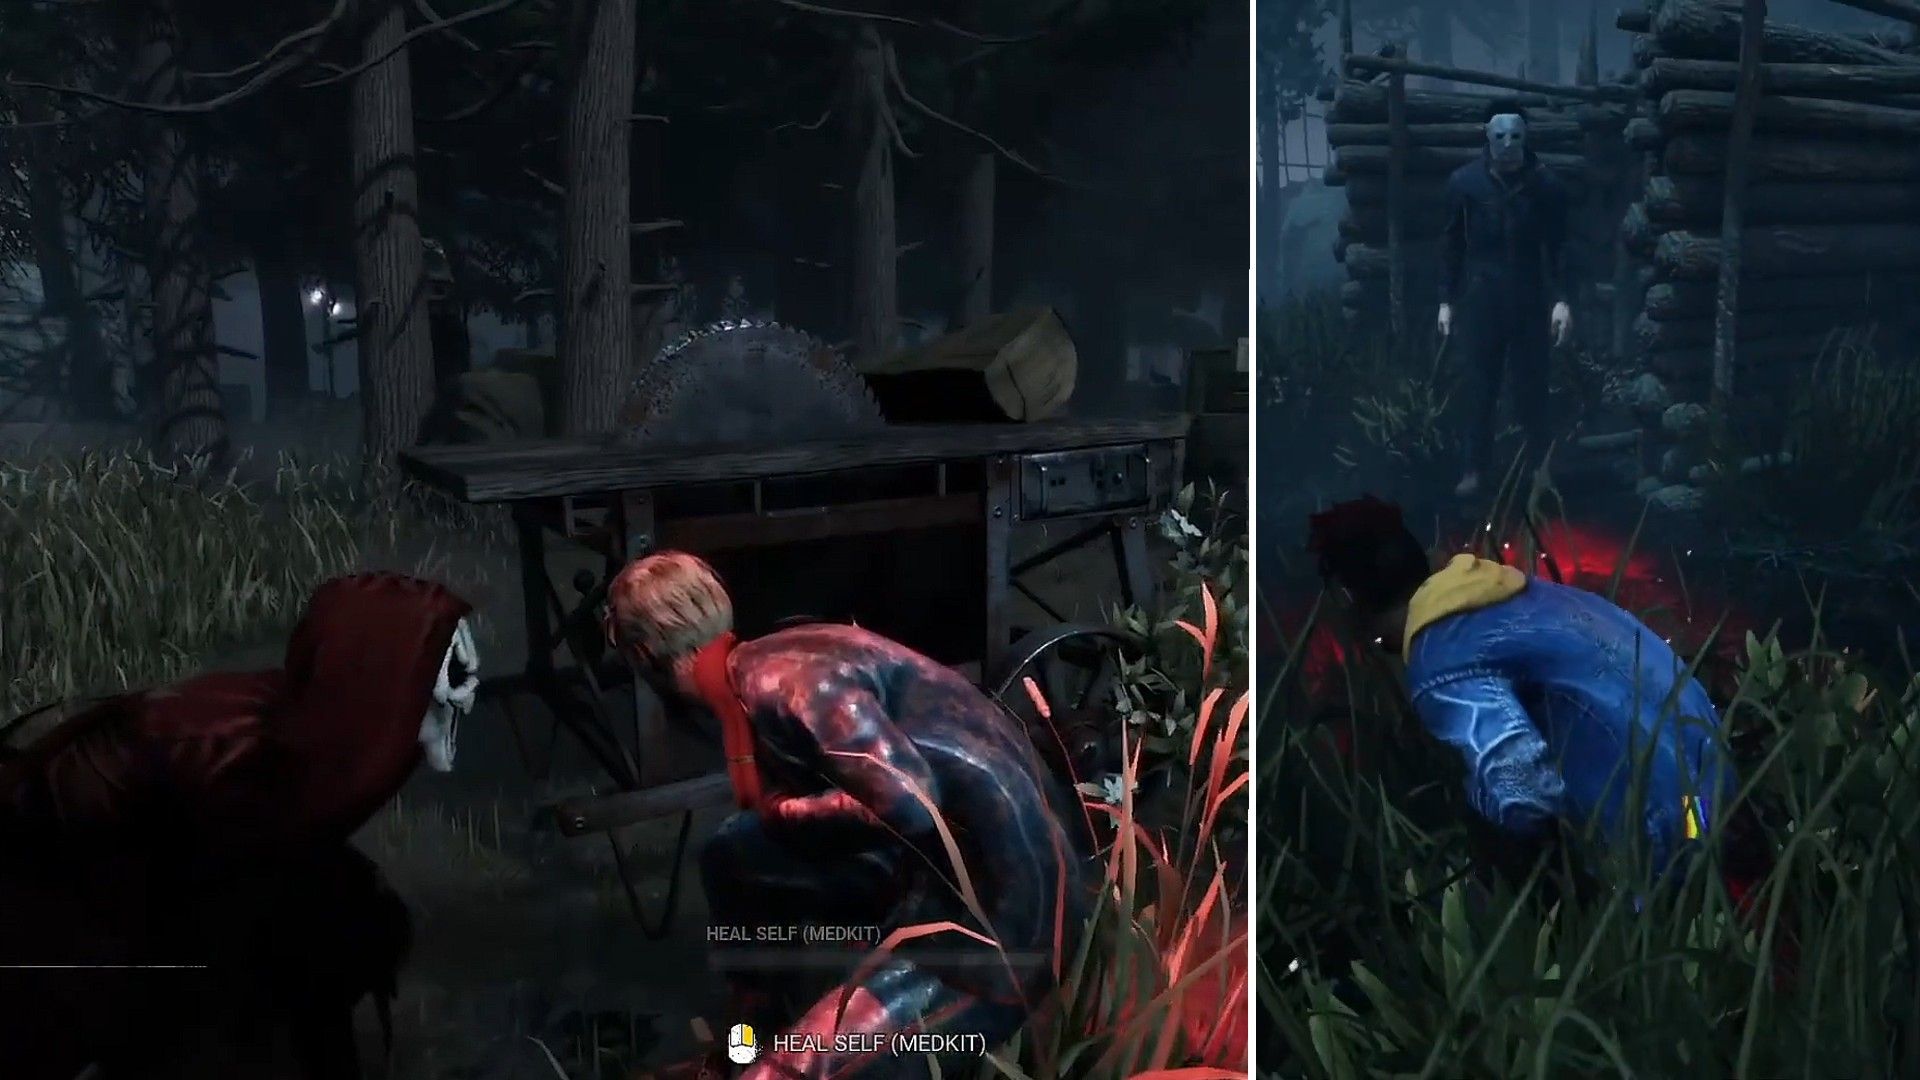 A Ghost Face and Michael Myers killer intimidate survivors by nodding or crouching in dead by daylight